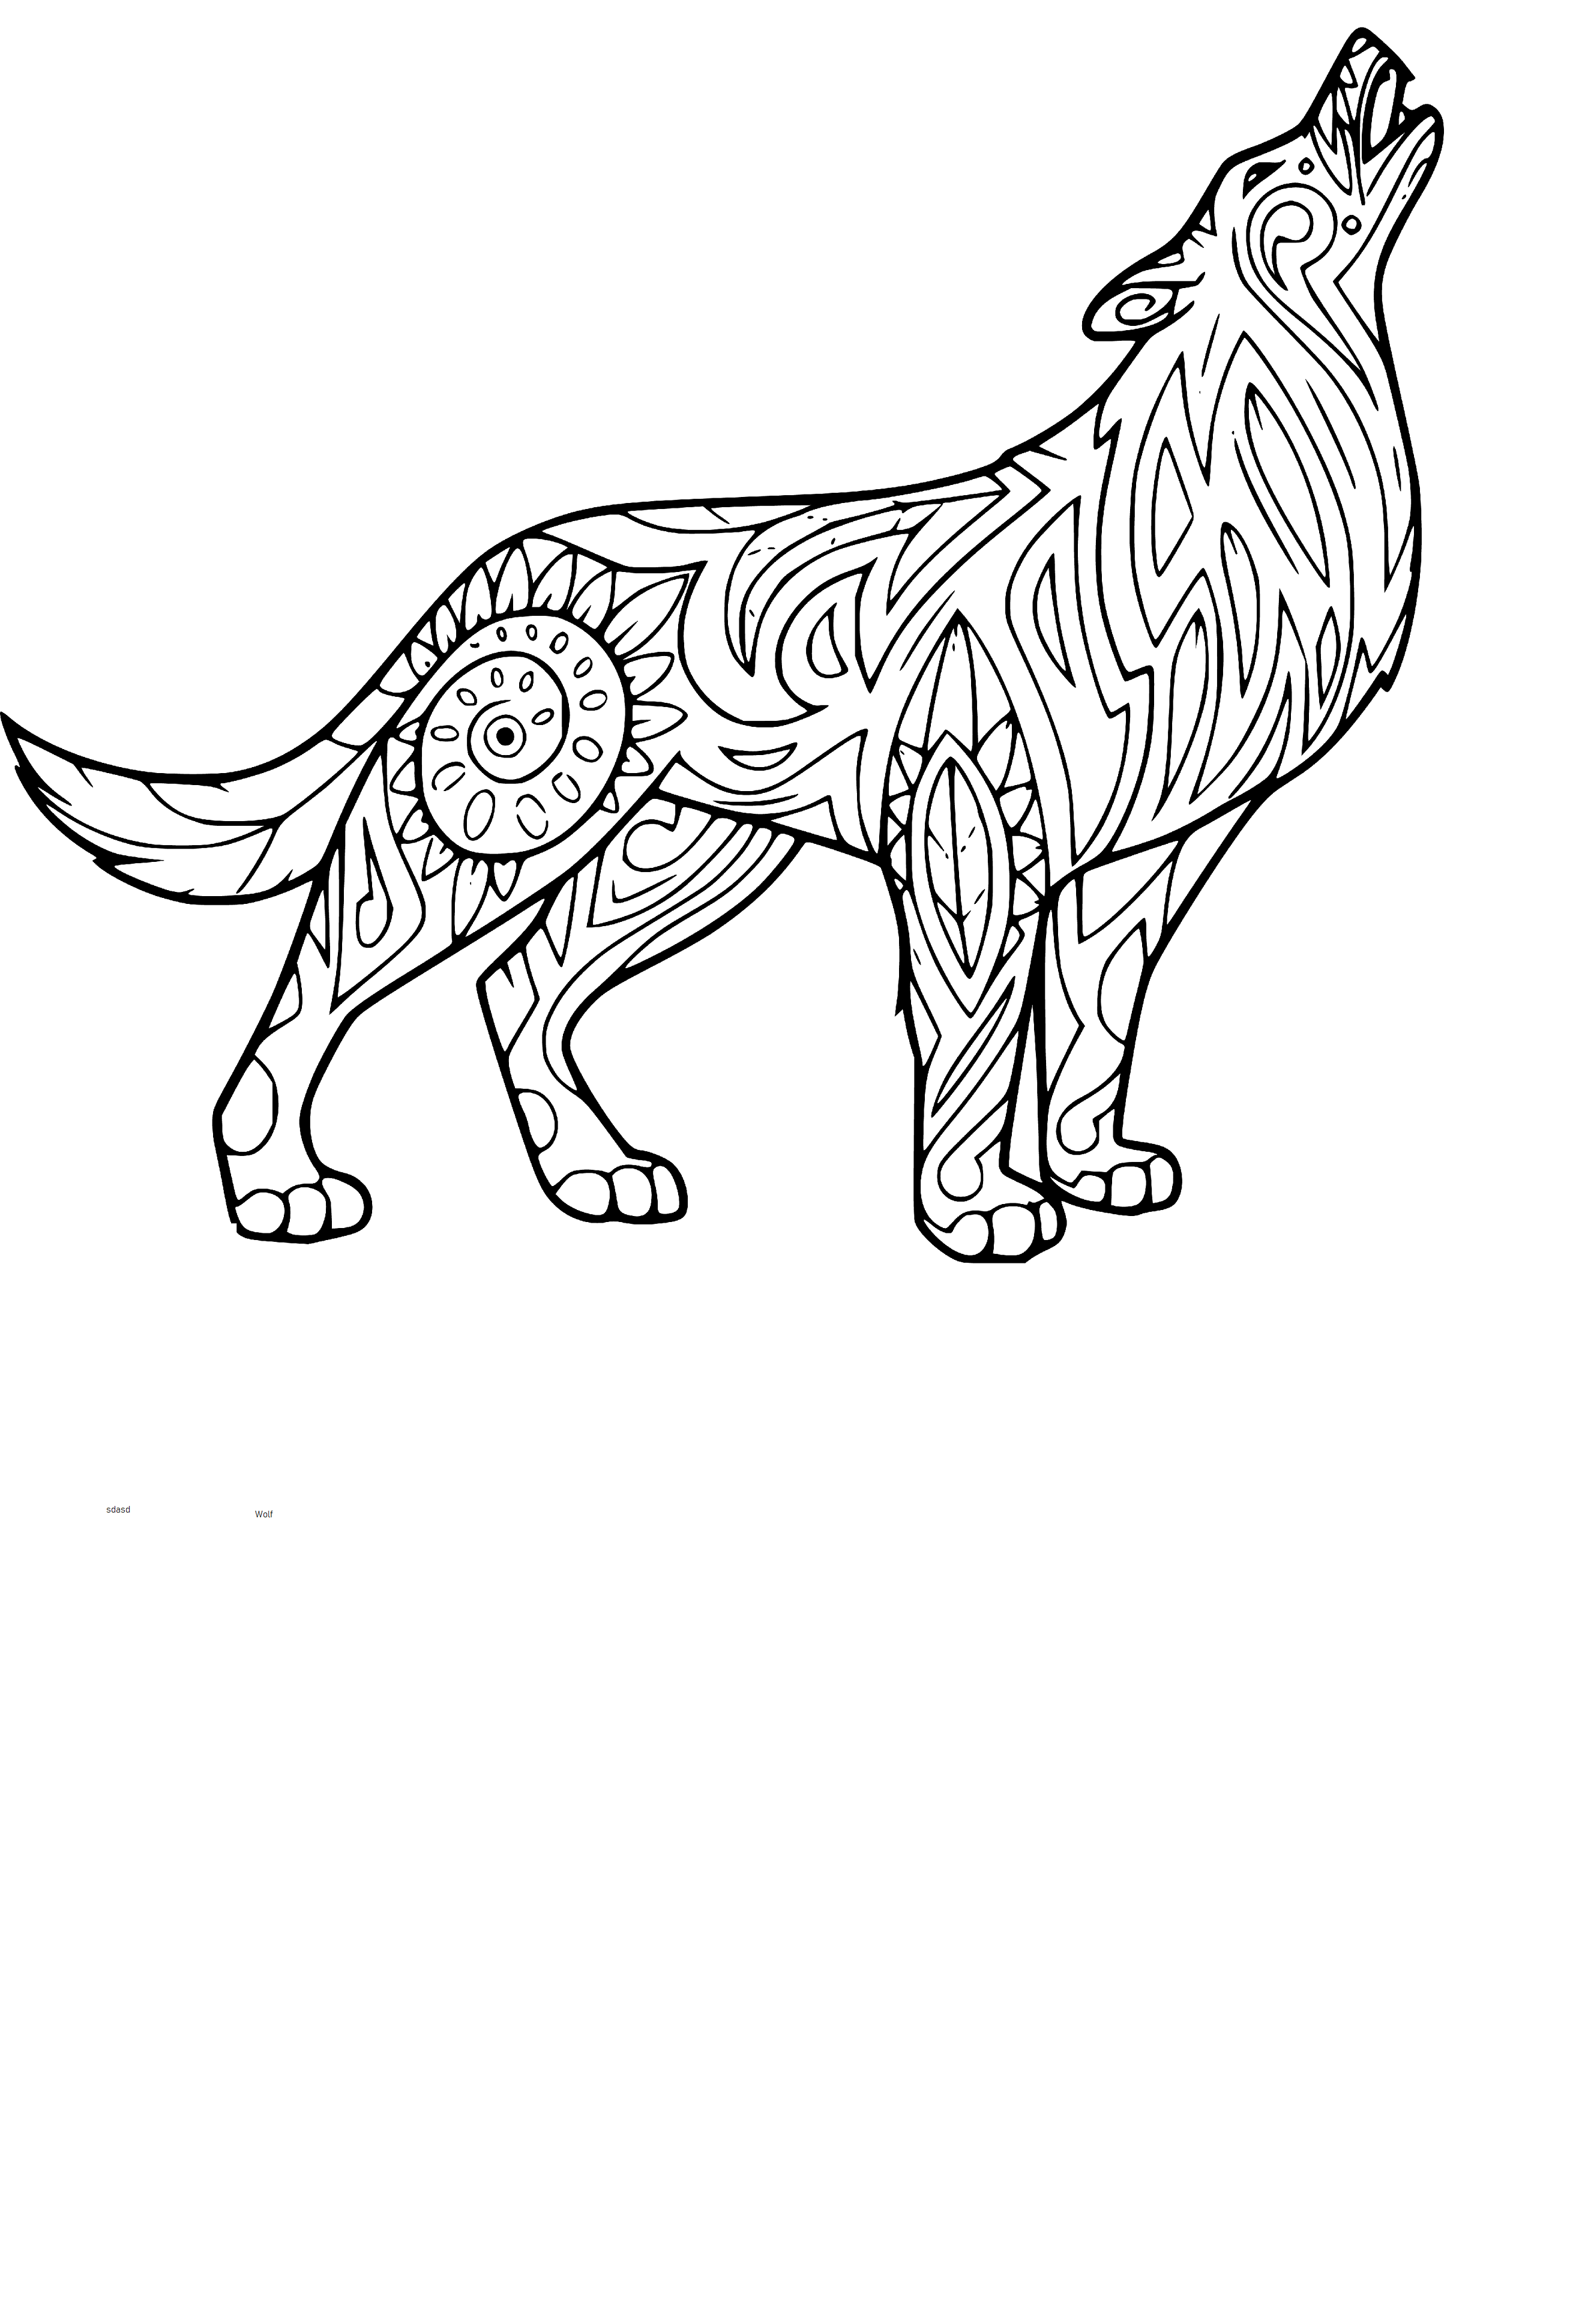 Printable Zentangle Wolf Coloring Page for kids.